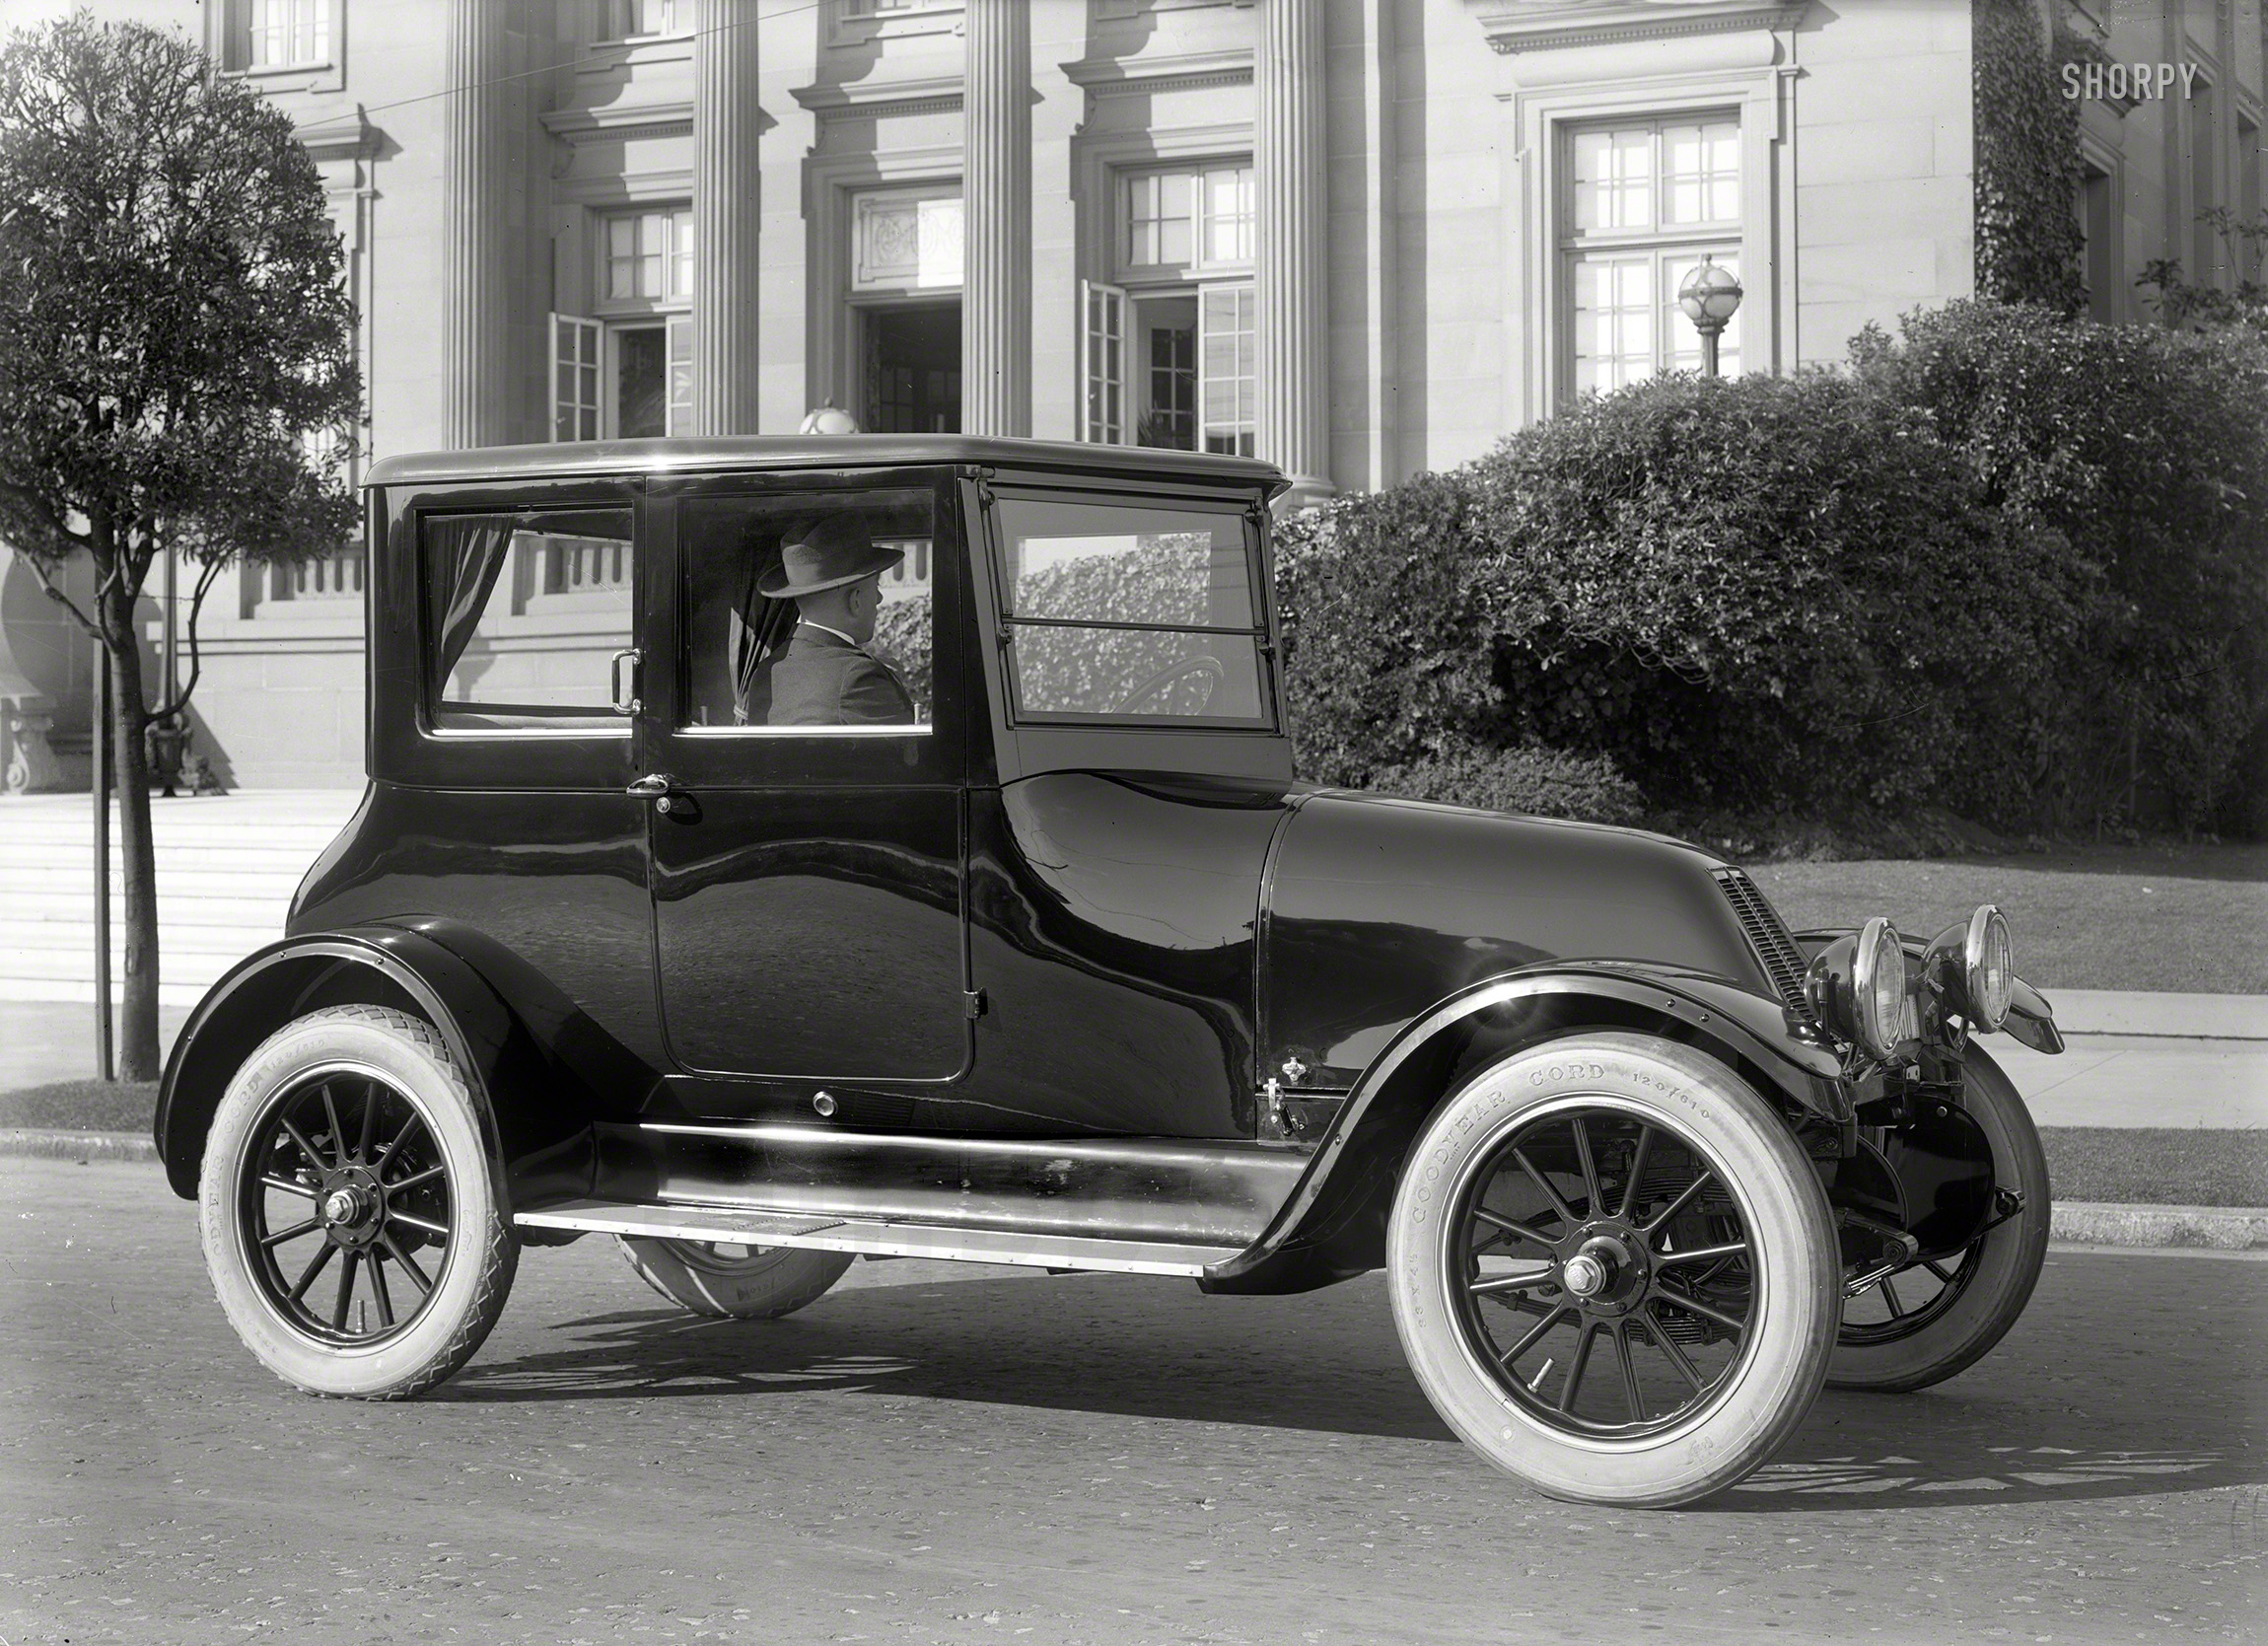 San Francisco circa 1919. "Franklin Brougham." A car with an air-cooled engine and unusual veed windshield. Latest entry in the Shorpy Catalog of Quirky Conveyances. 5x7 glass negative by Christopher Helin. View full size.